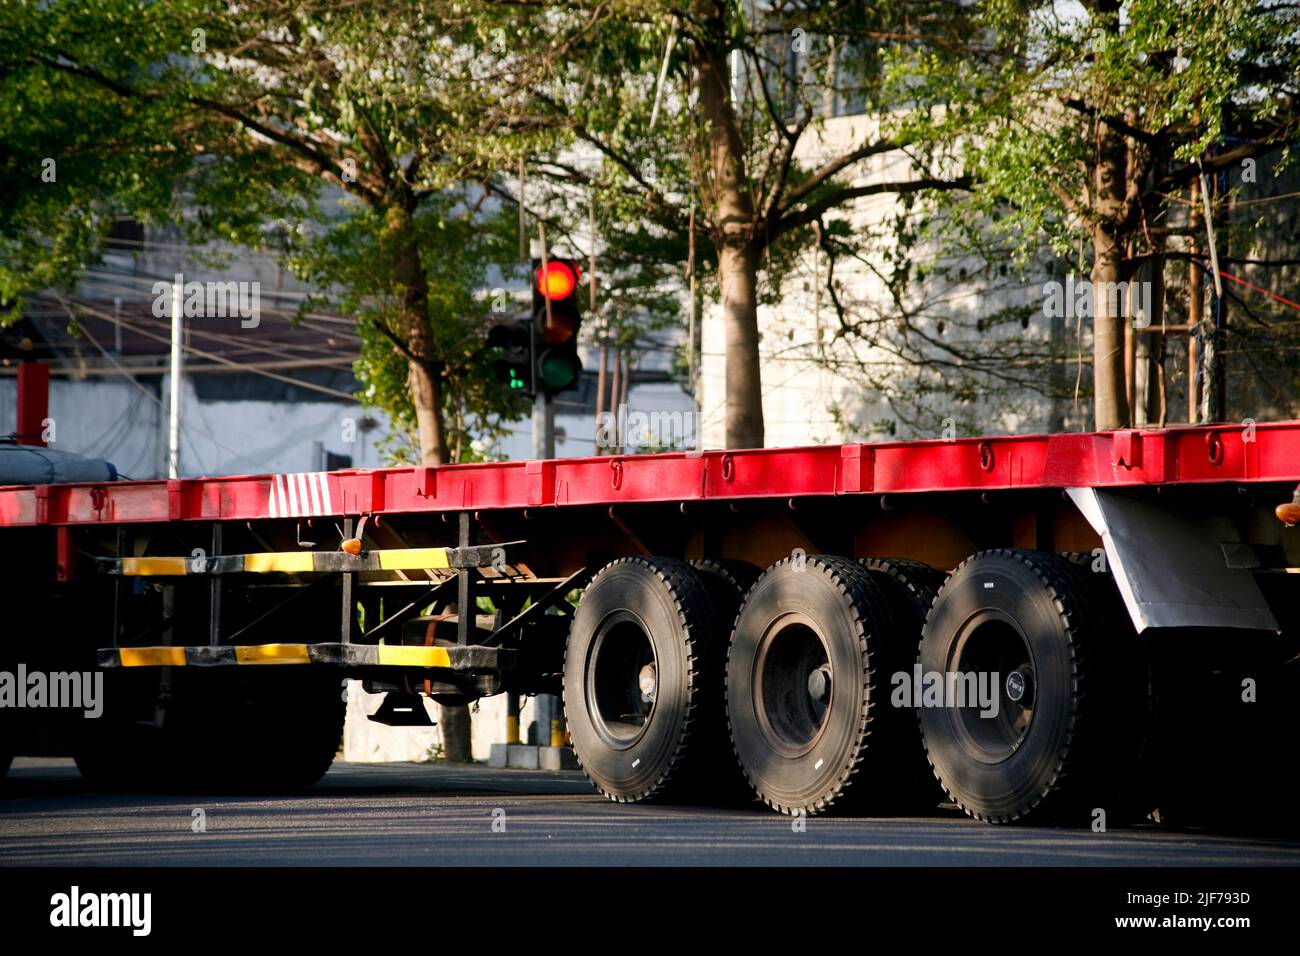 Truck trailer without box in traffic light Stock Photo